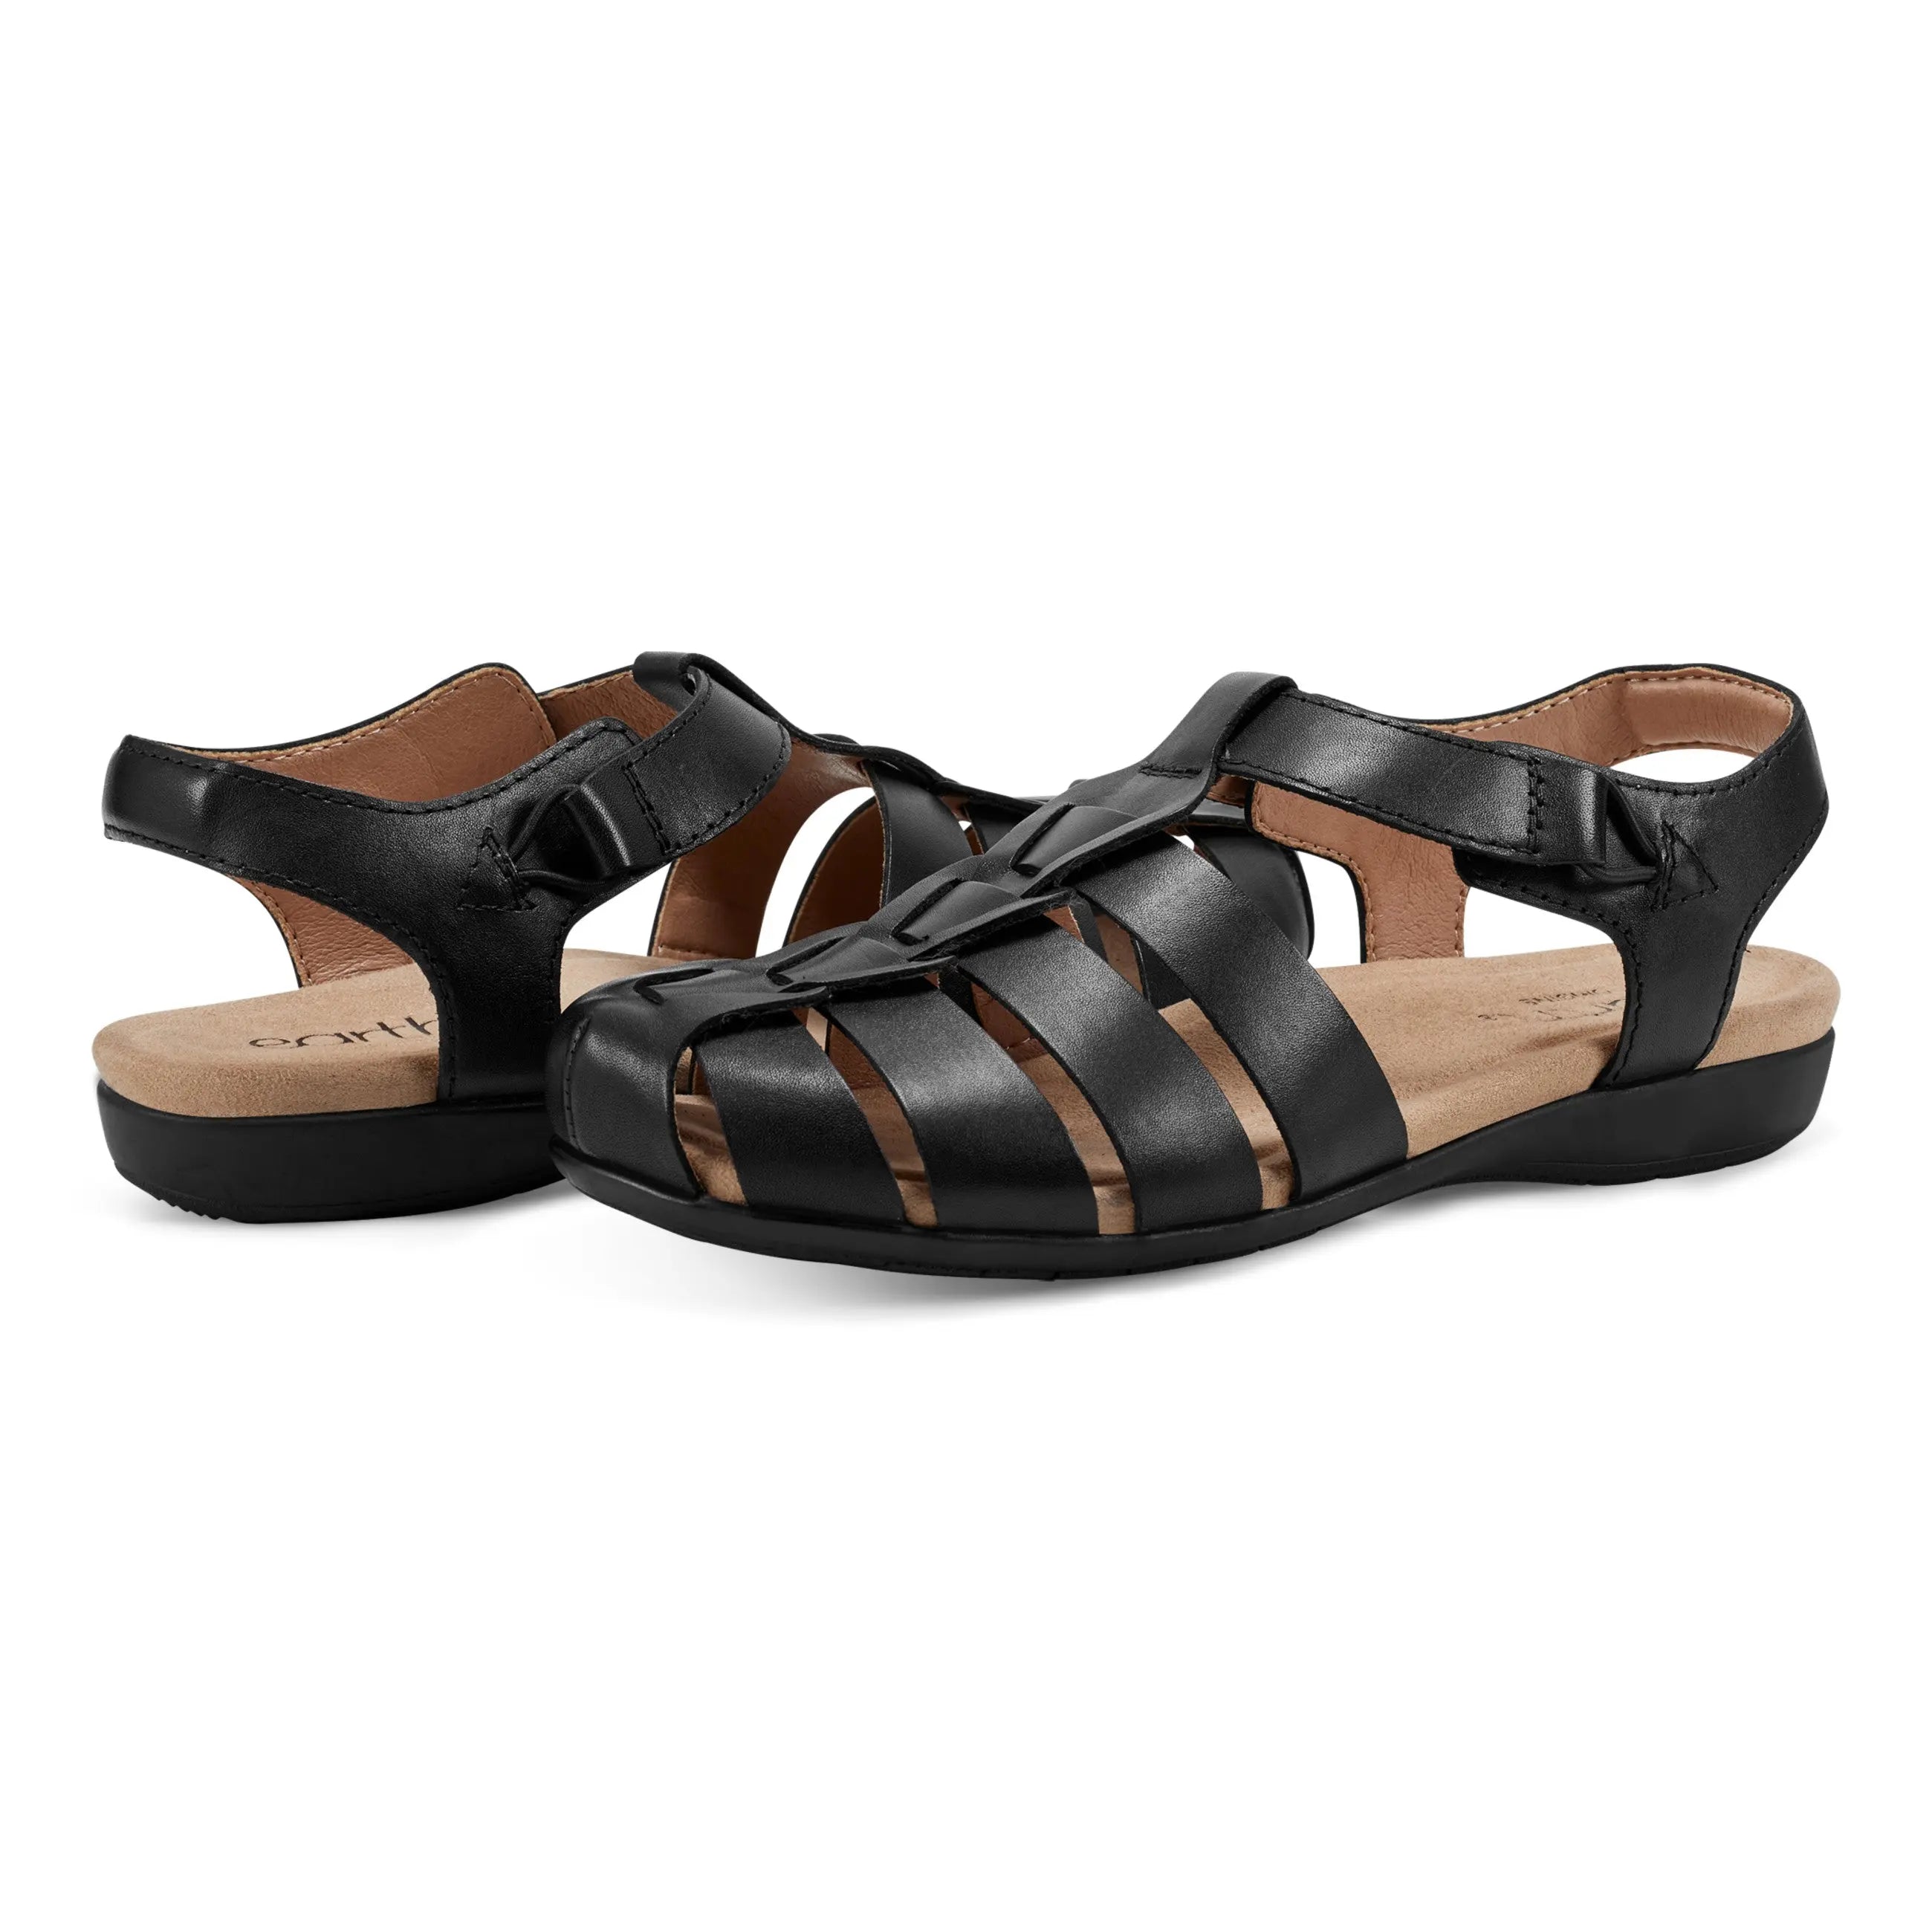 Blake Woven Casual Round Toe Slip-On Sandals